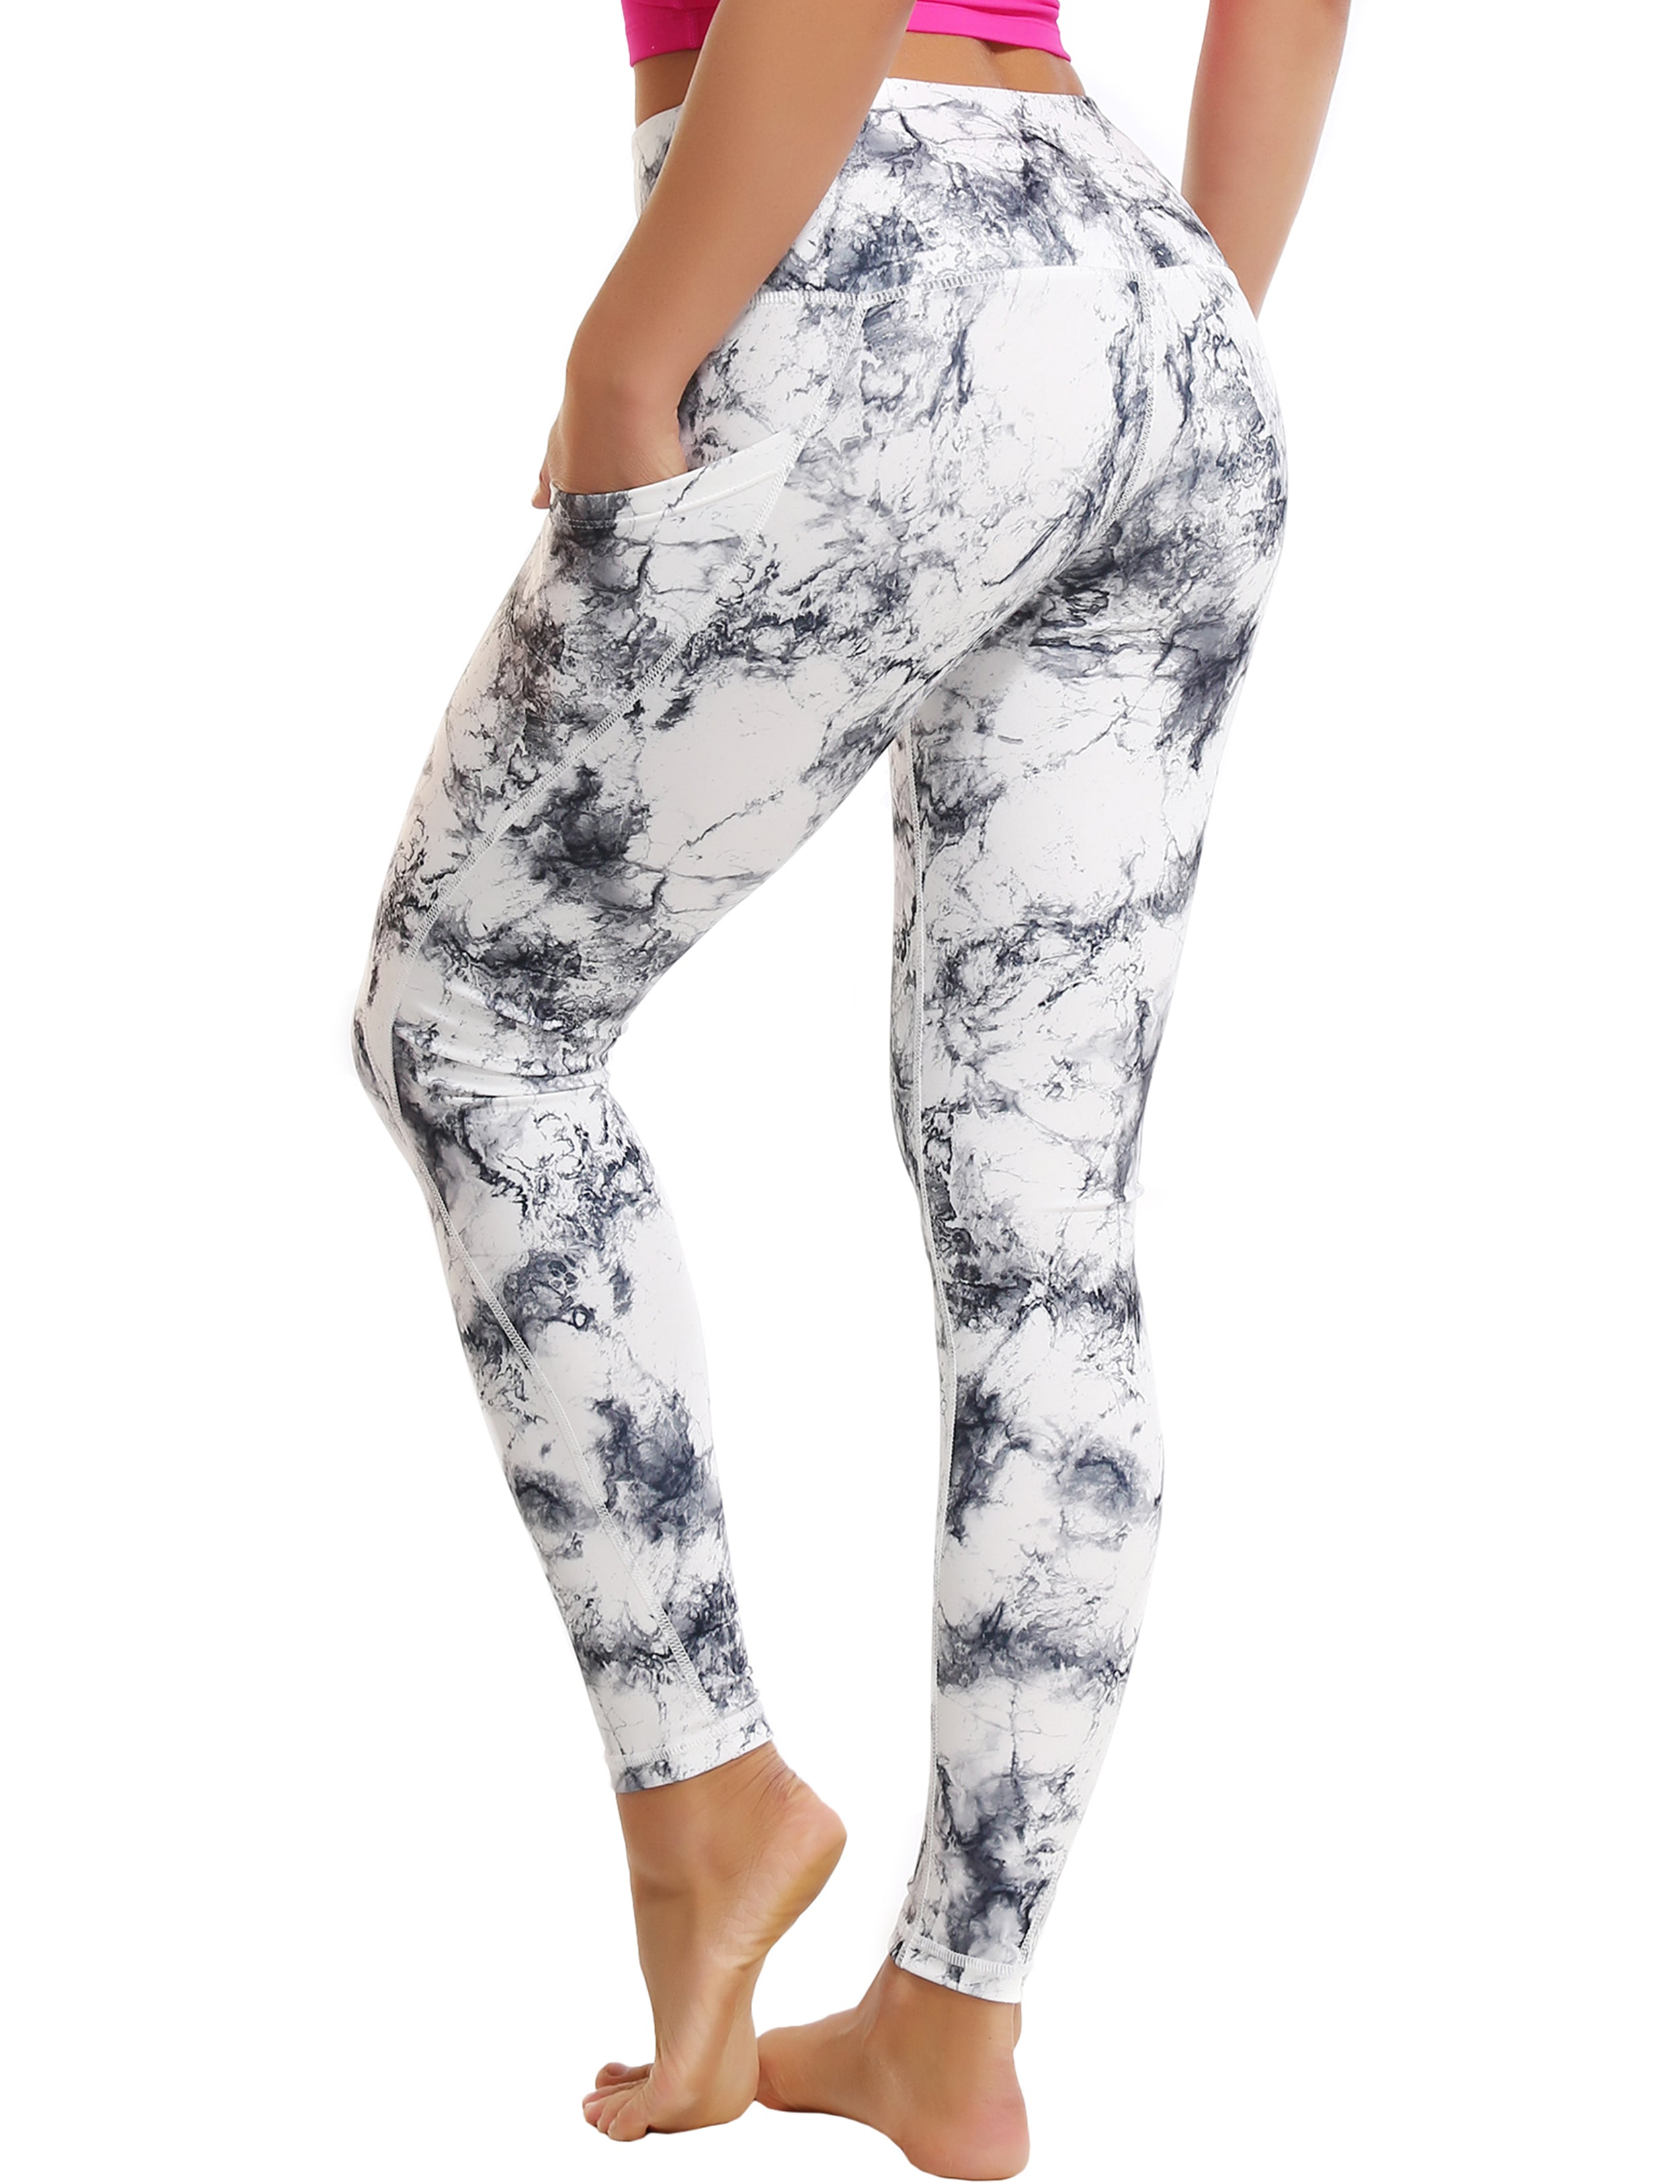 High Waist Side Pockets Gym Pants arabescato 78%Polyester/22%Spandex Fabric doesn't attract lint easily 4-way stretch No see-through Moisture-wicking Tummy control Inner pocket